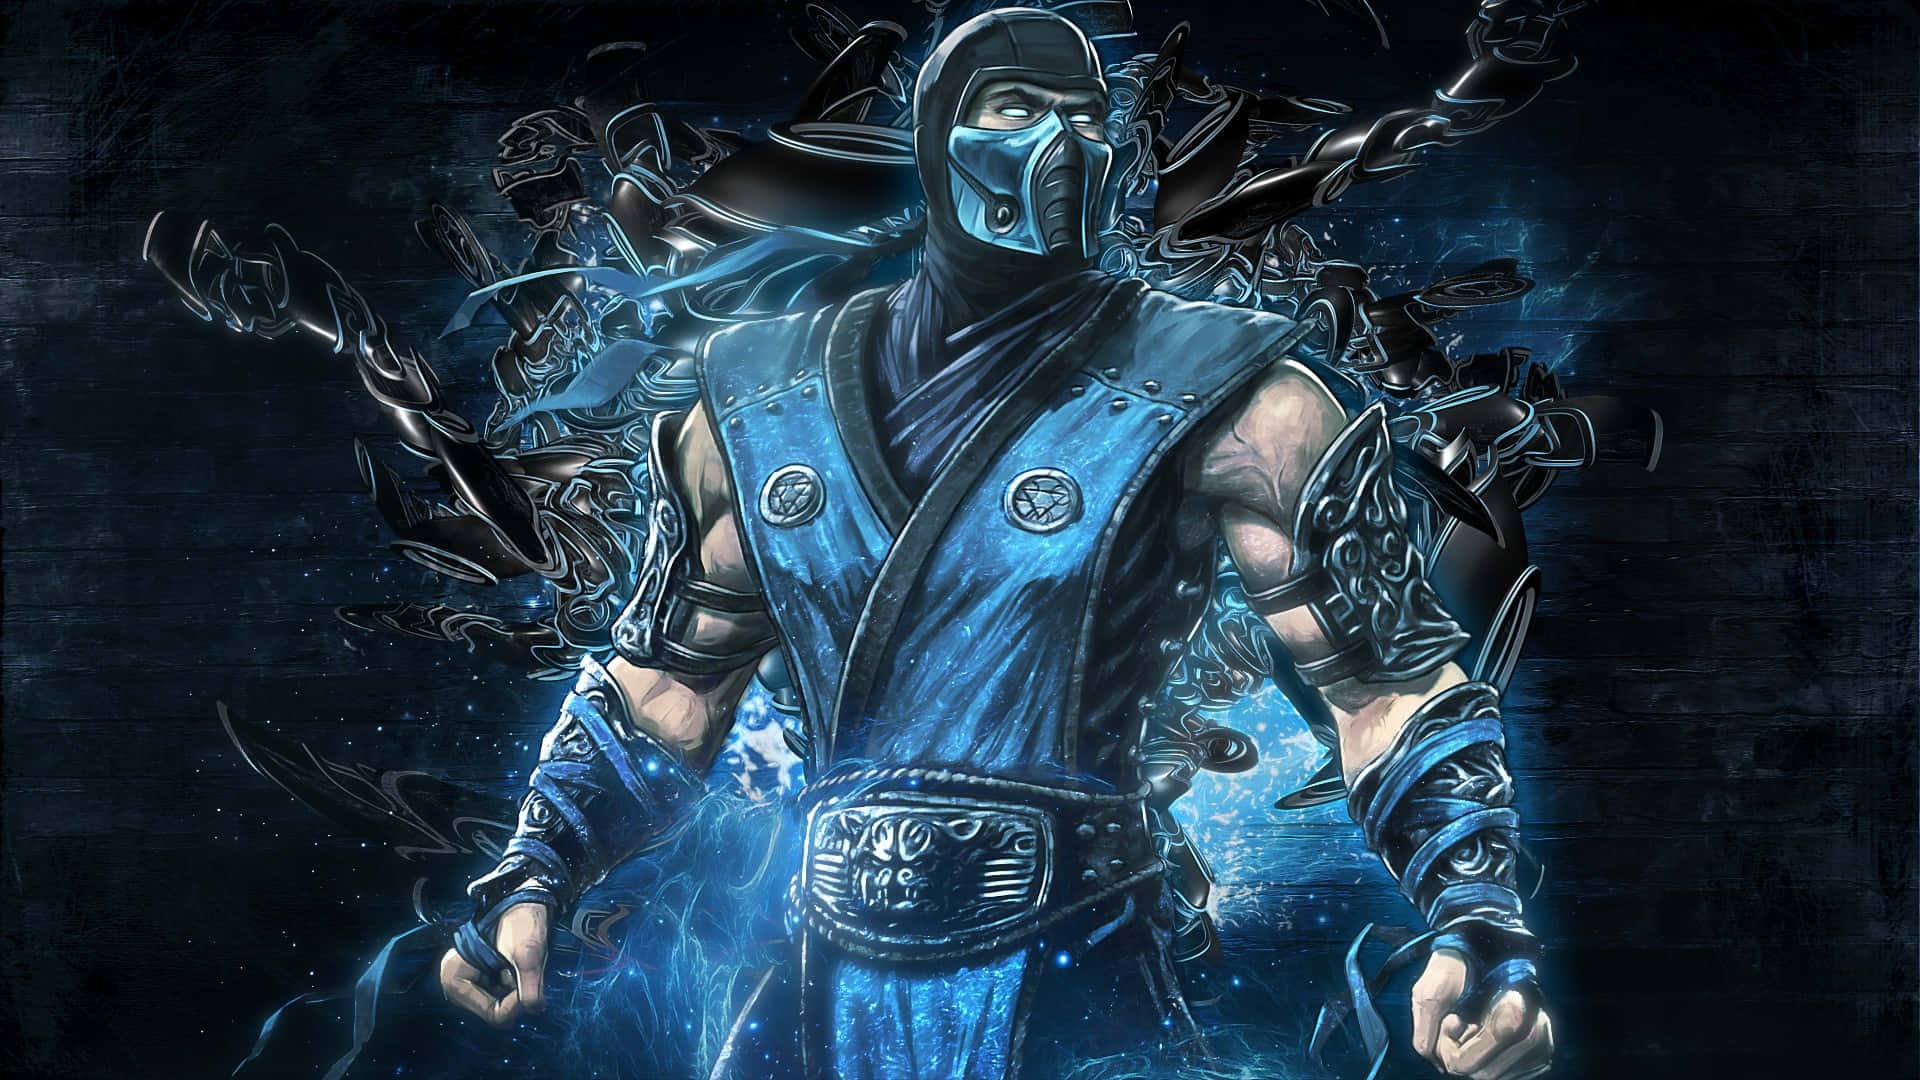 Experience the ultimate rivalry with Mortal Kombat